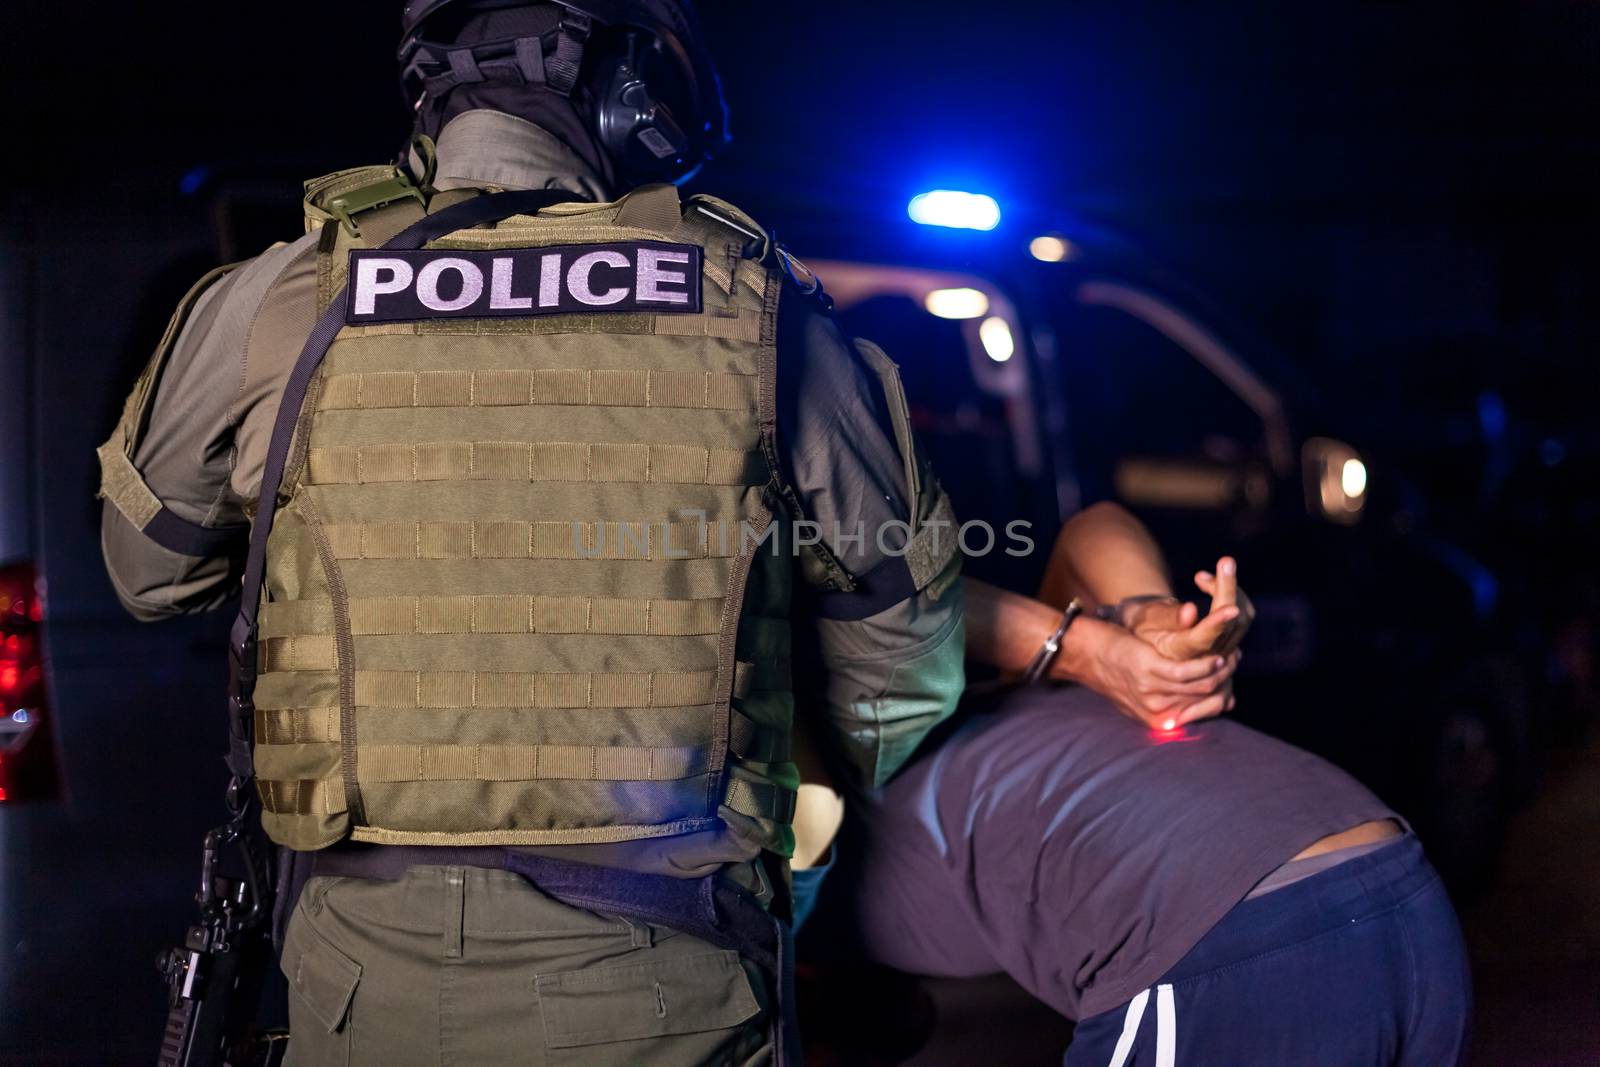 A police officer puts handcuffs on a criminal's hands during an arrest. Police car with flashing lighthouses. copy space